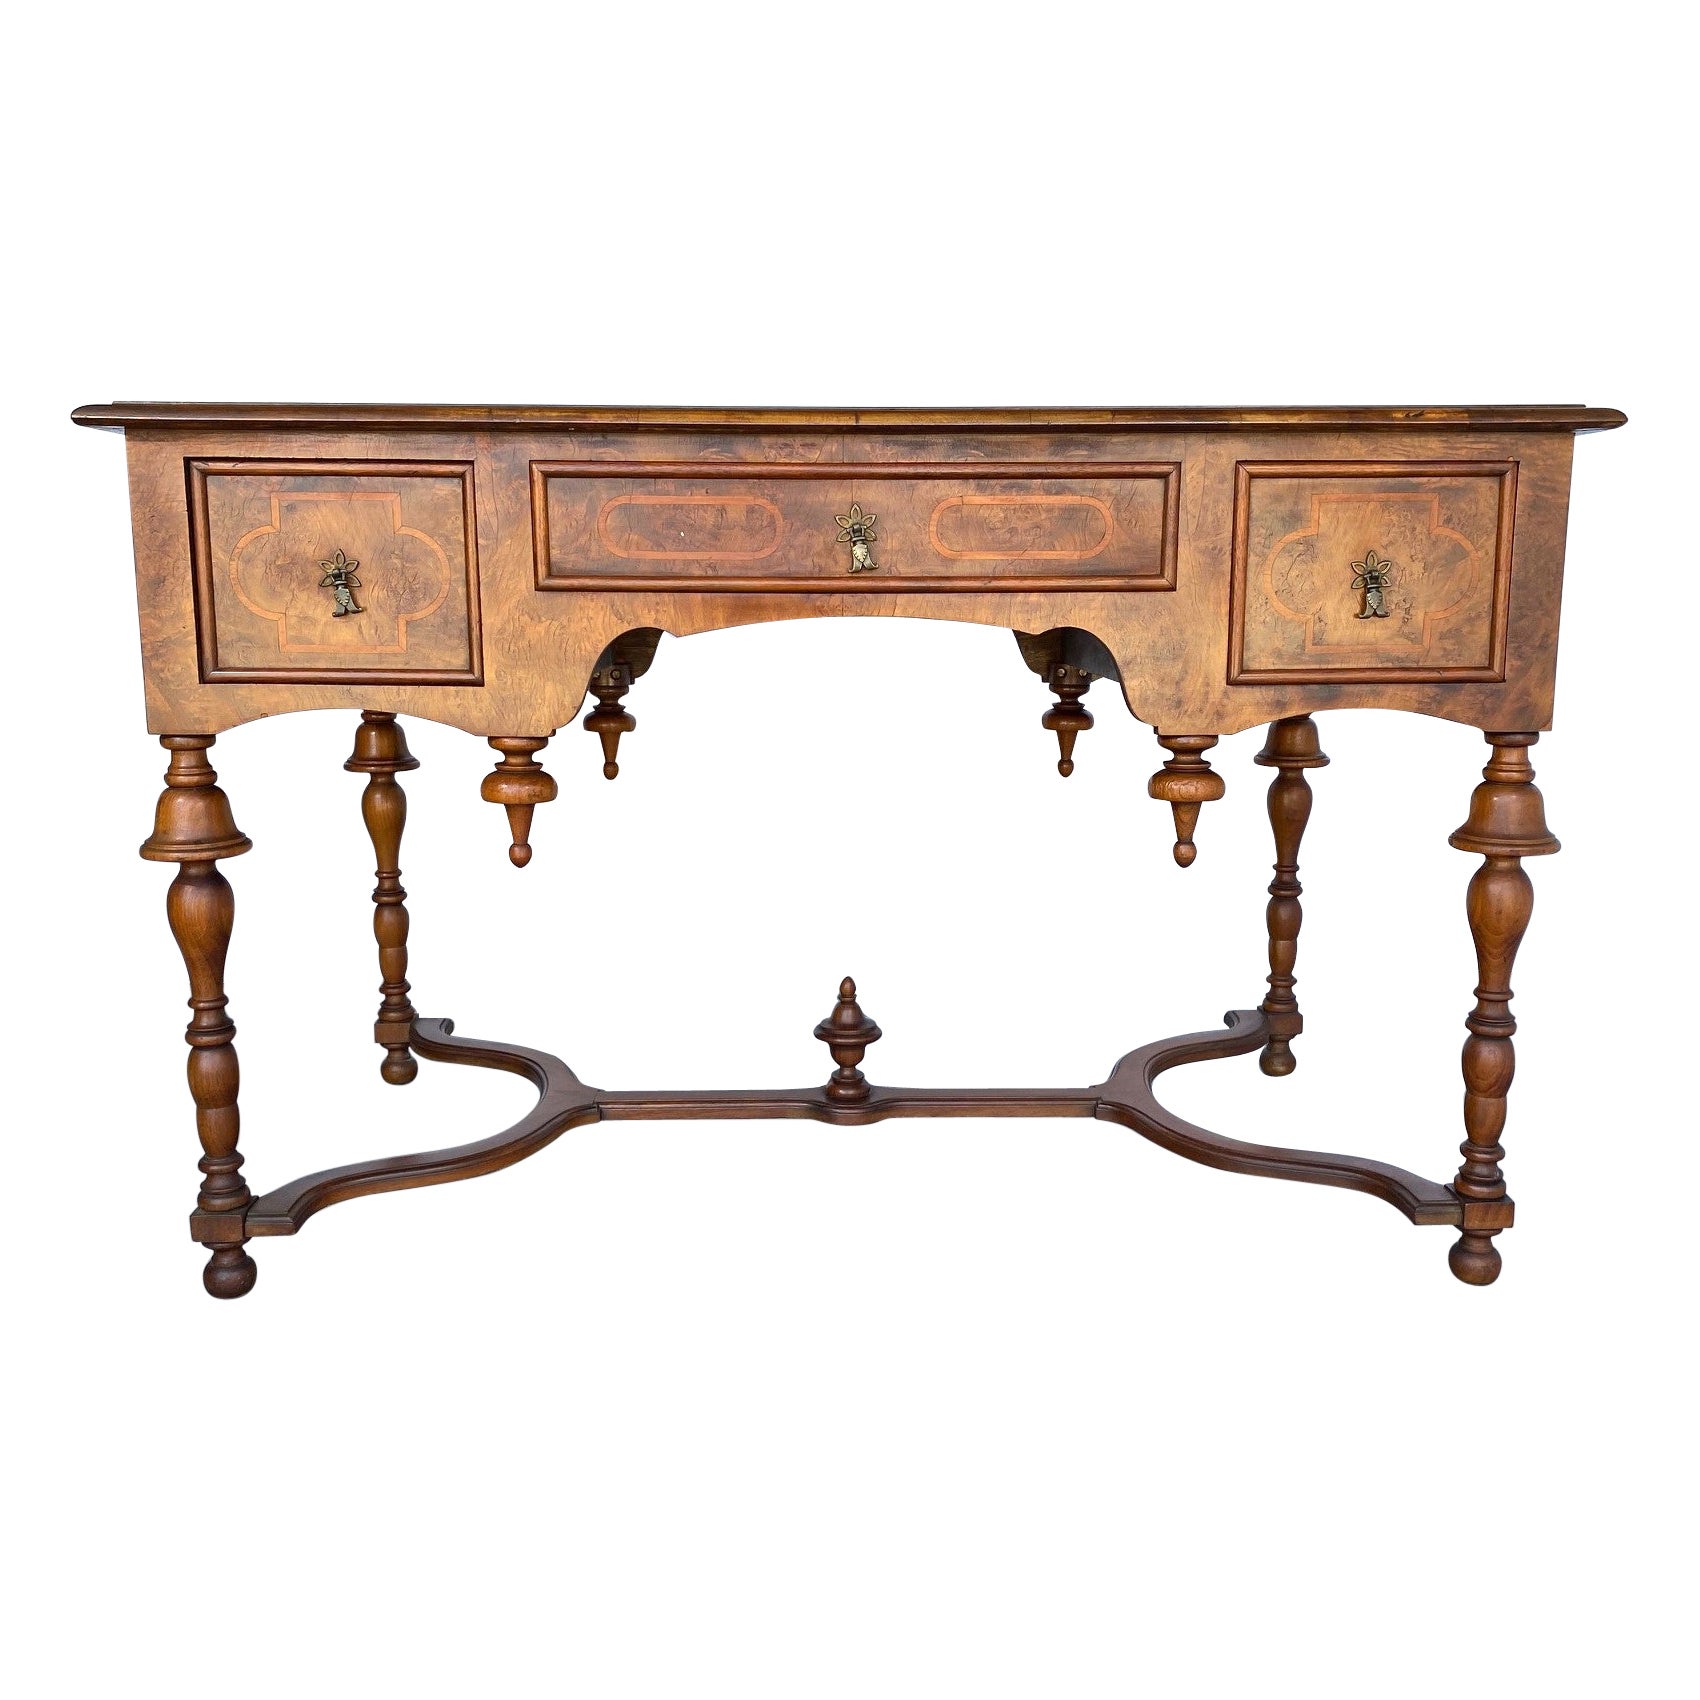 William and Mary Style Writhing Desk by John a Colby 